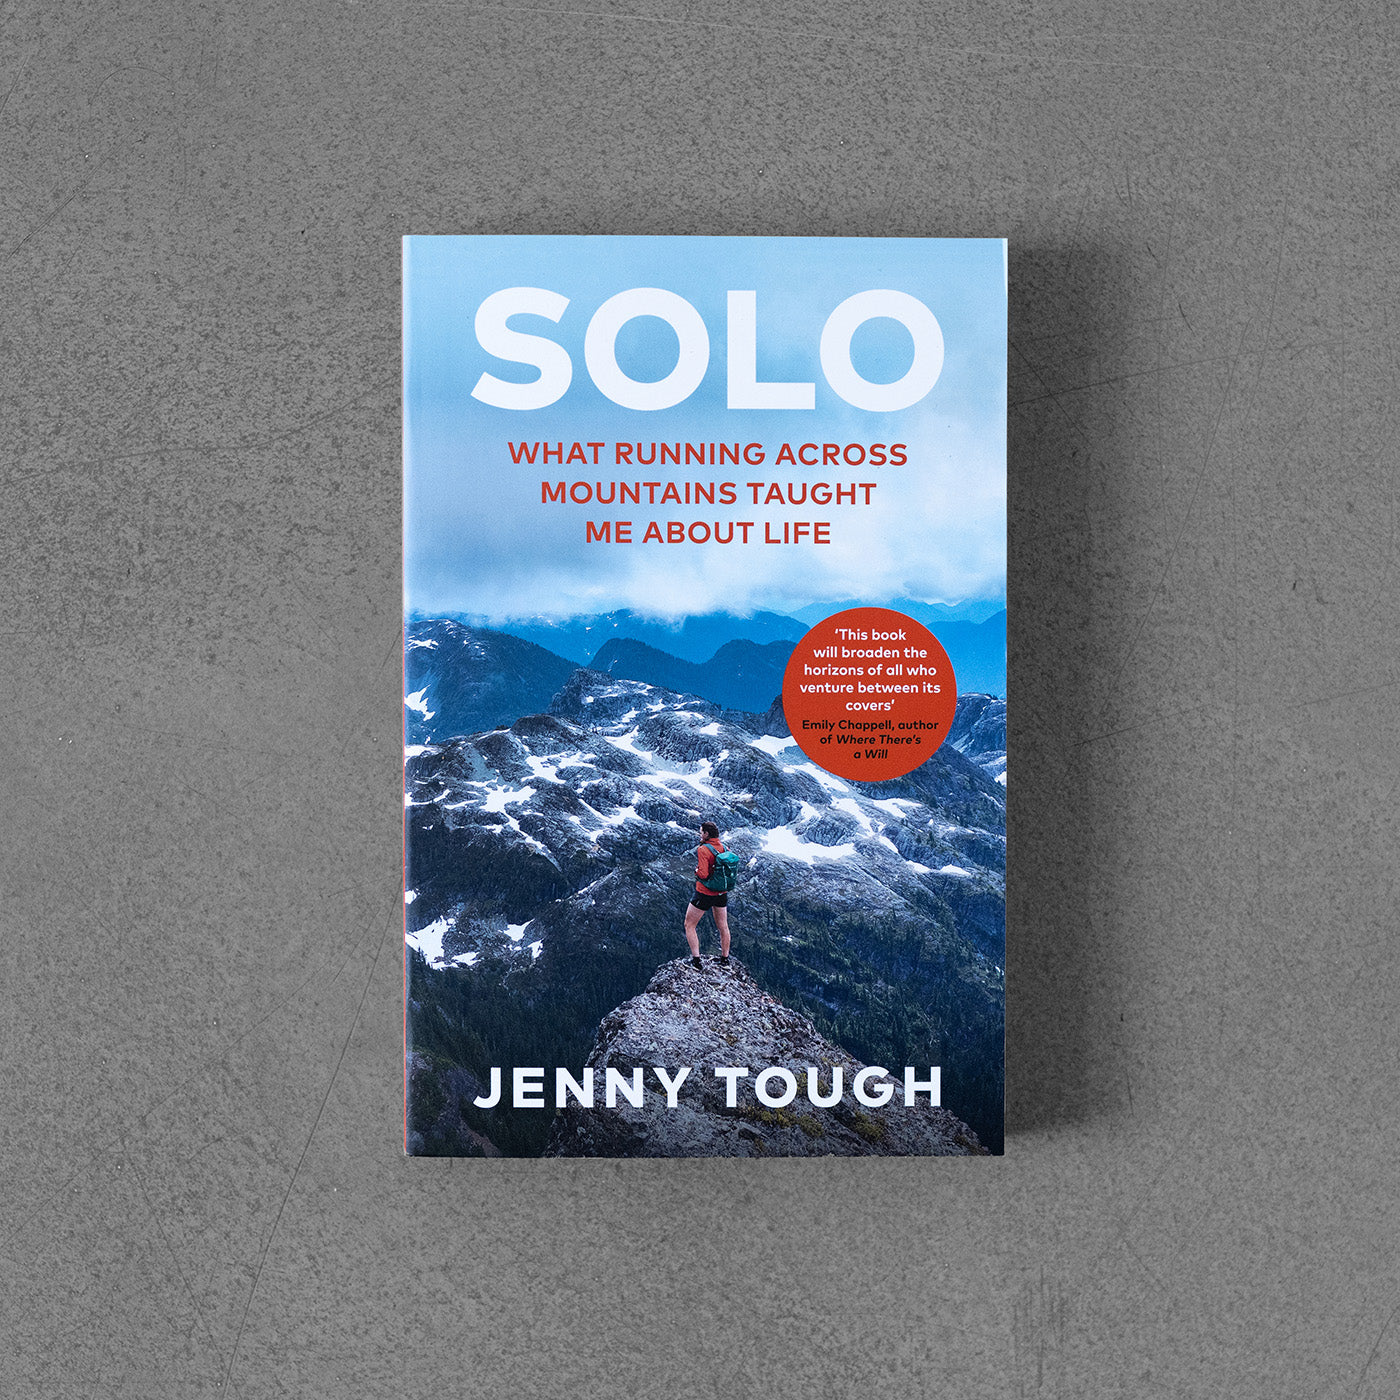 SOLO, What running across mountains taught me about life